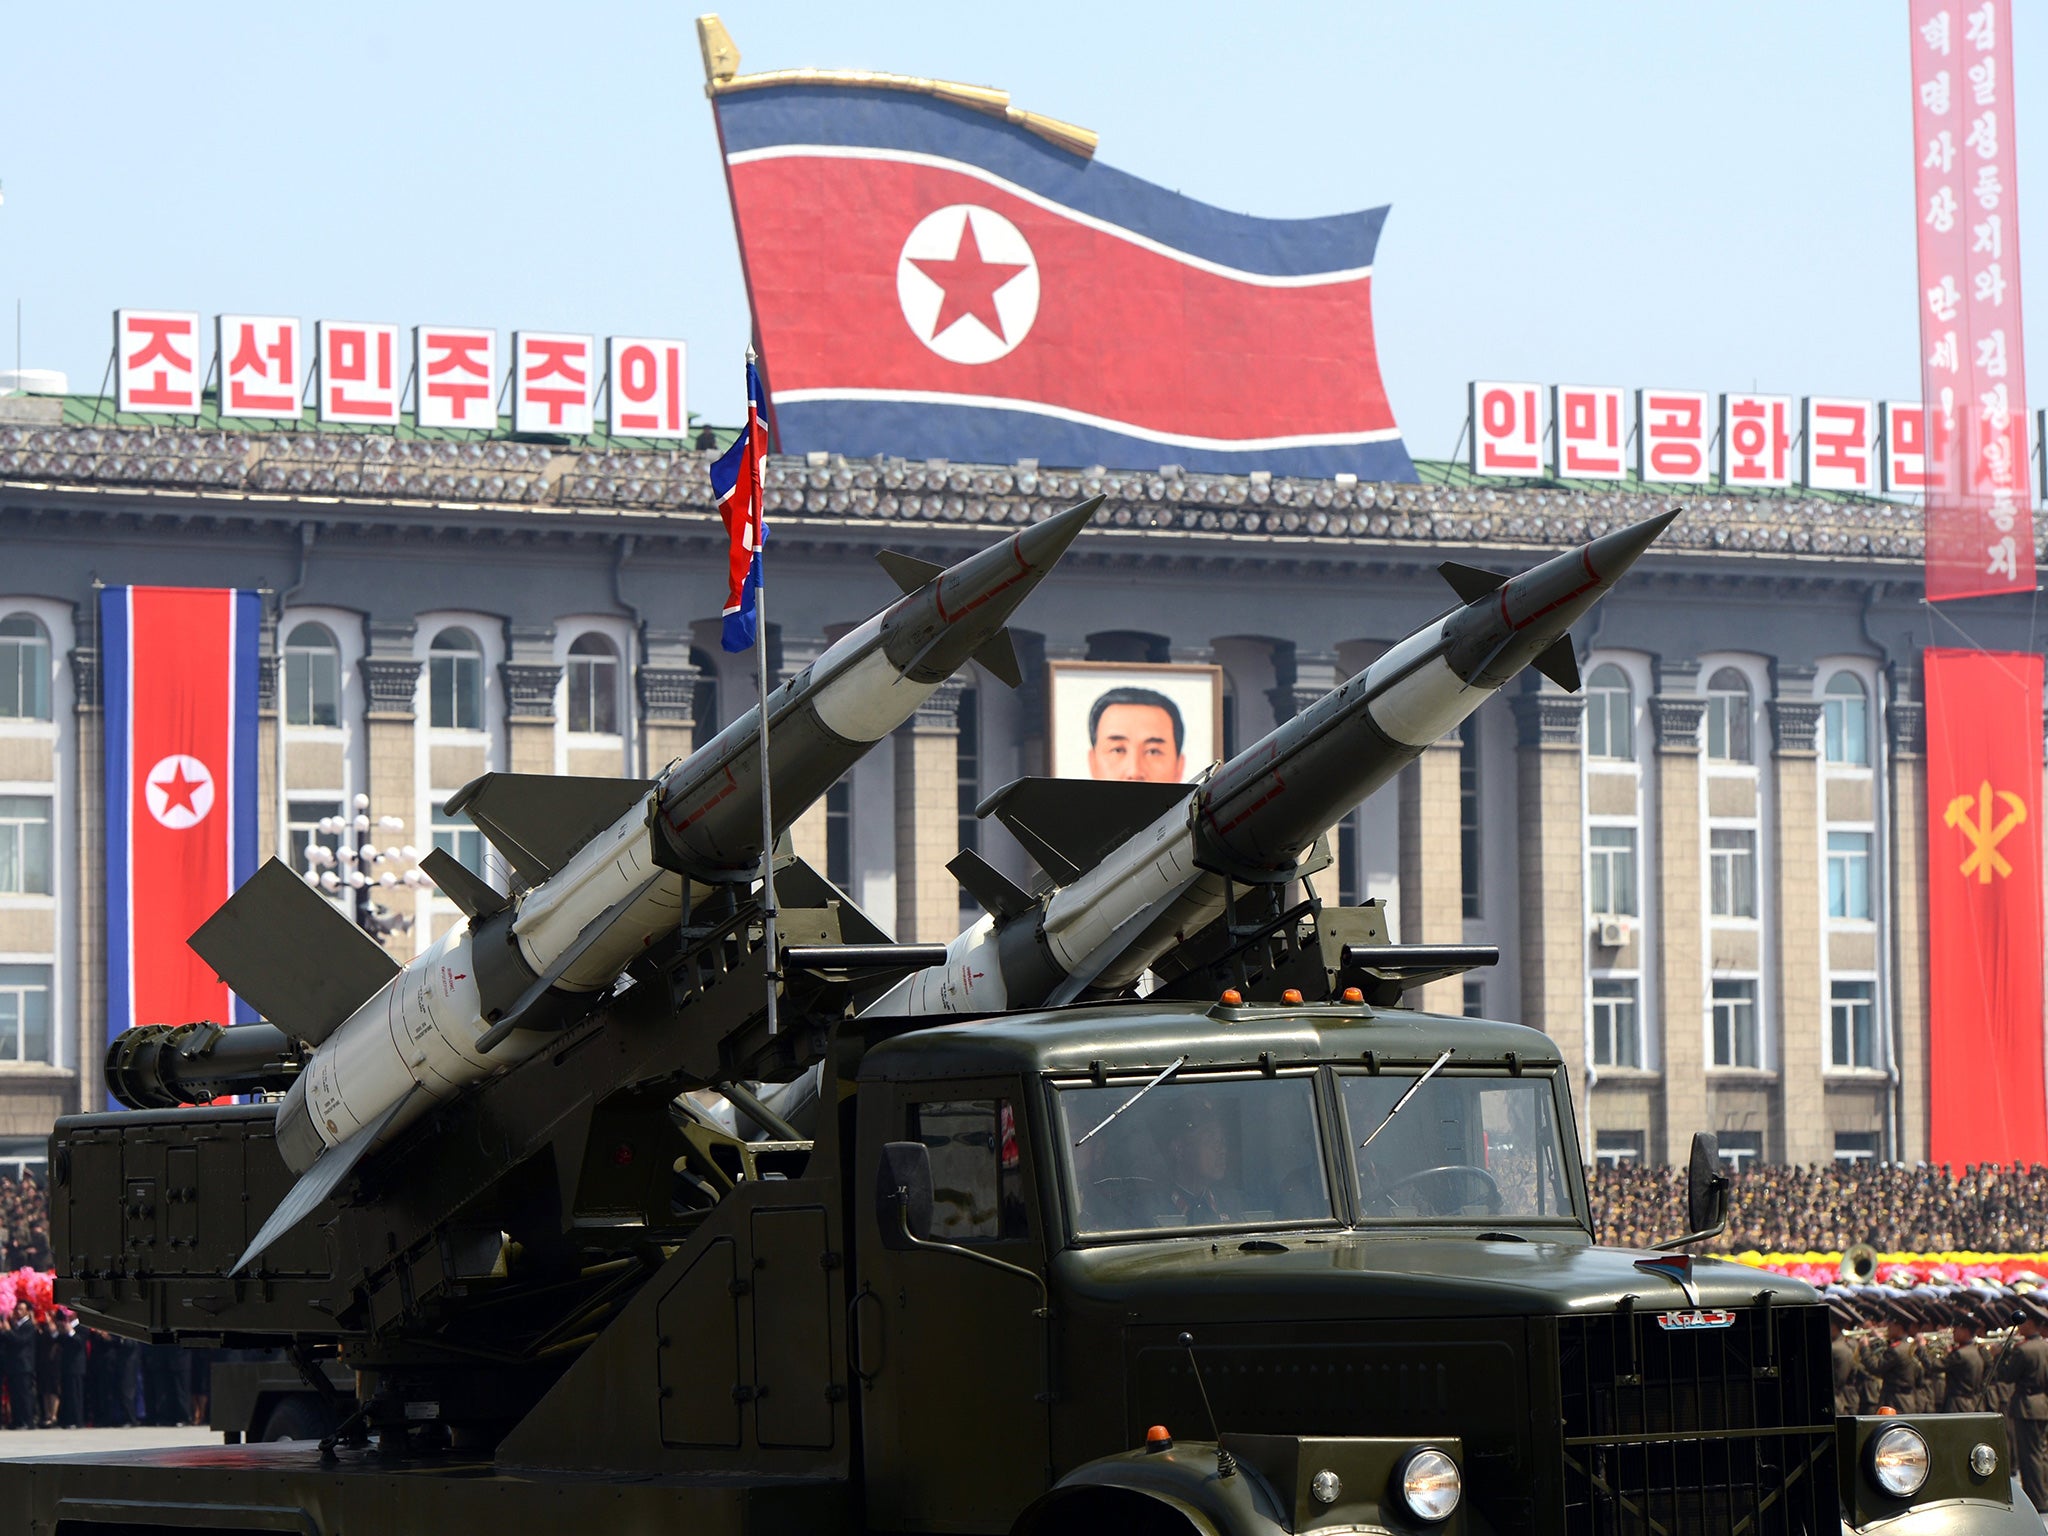 Missiles are displayed during a military parade in Pyongyang to mark 100 years since the birth of Kim Il-Sung